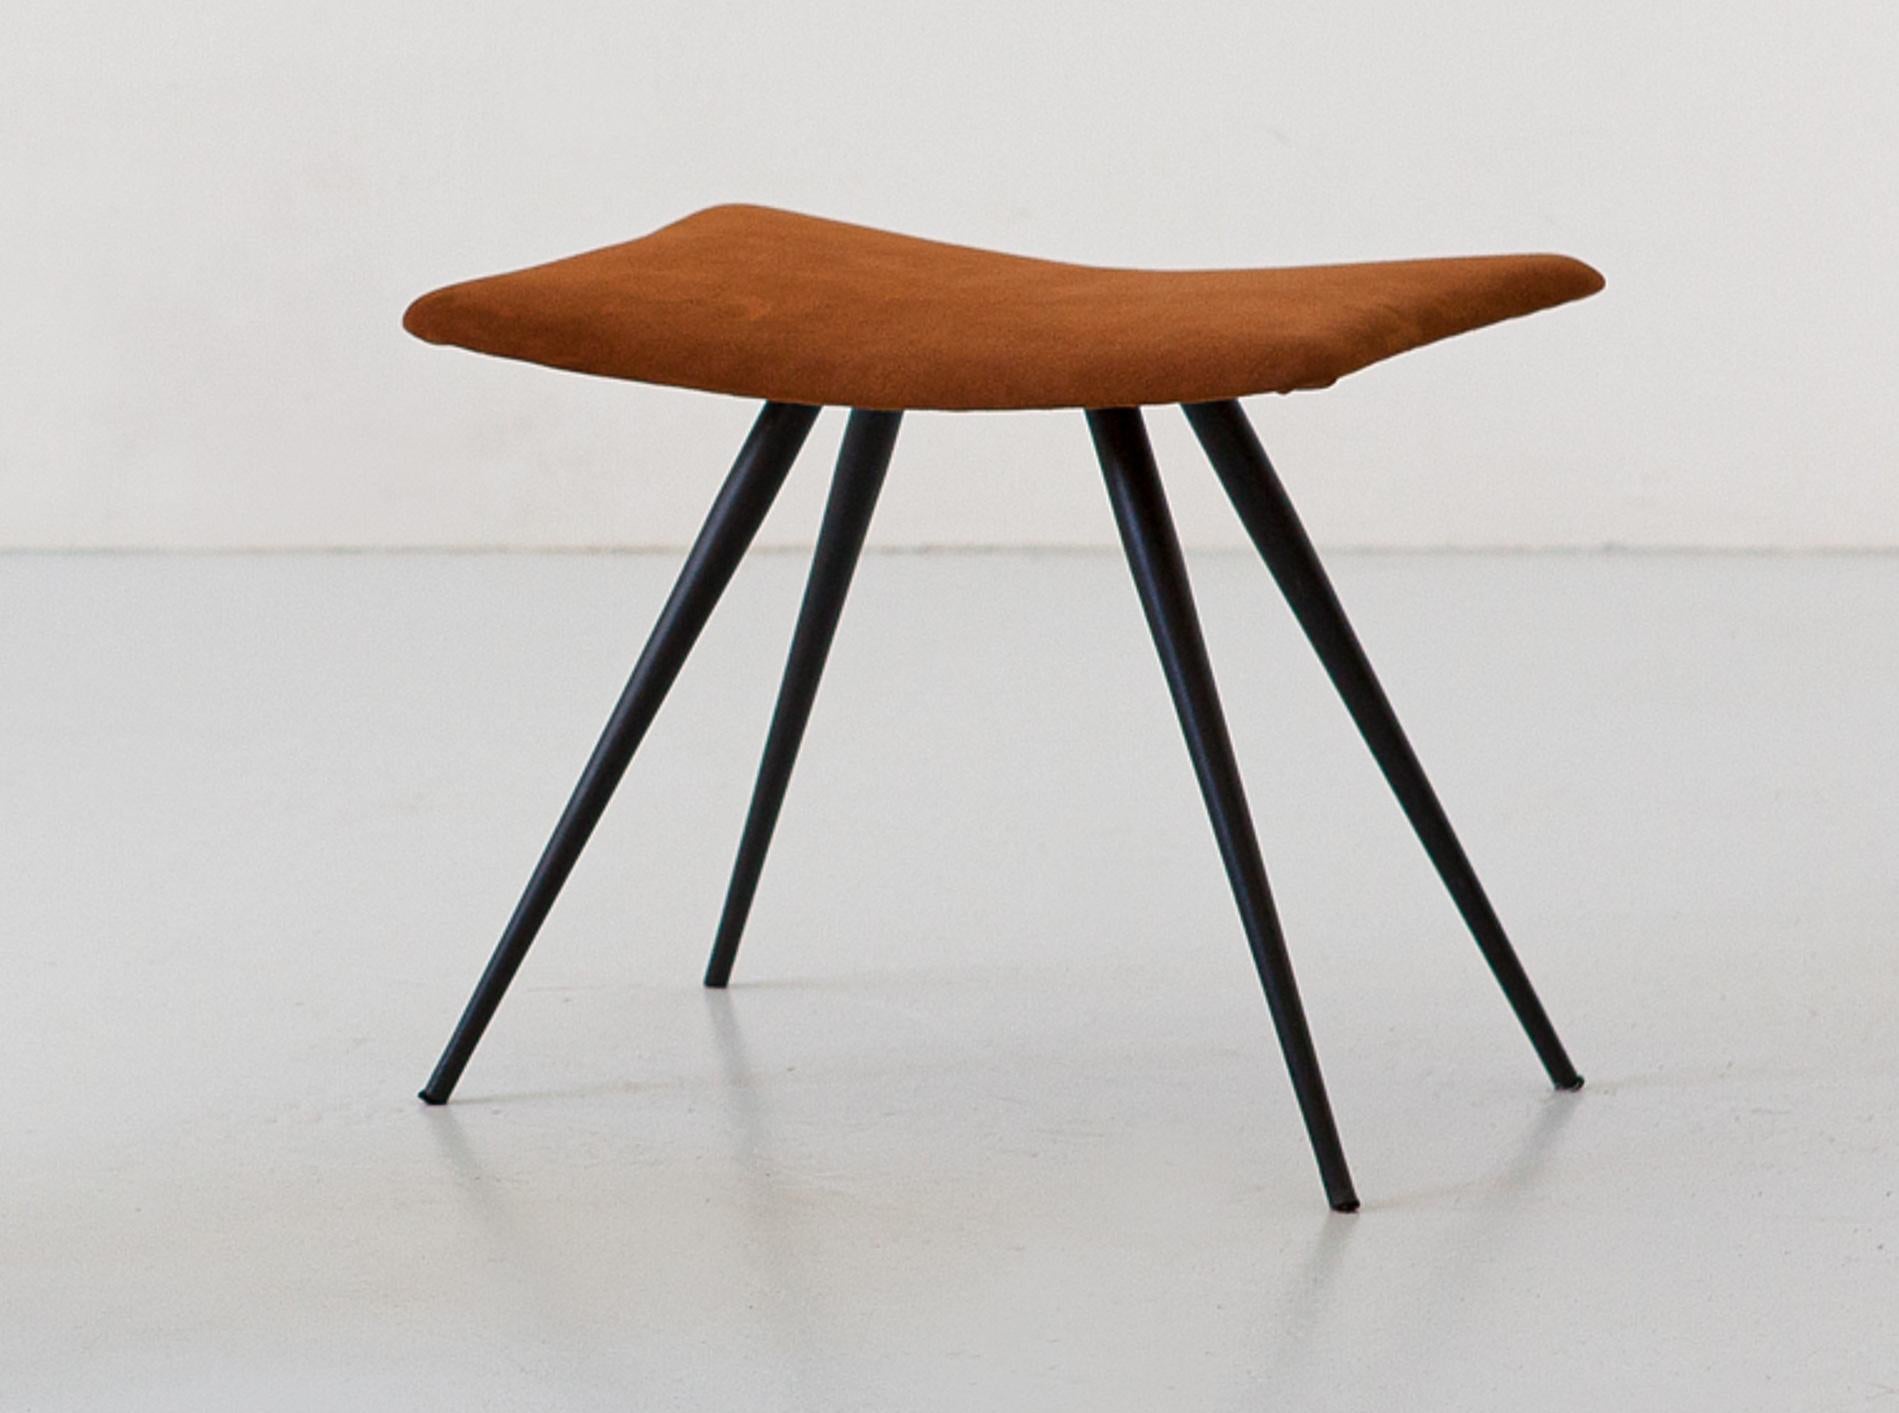 Italian Stool in Cognac Suede Leather and Black Steel Conical Legs, 1950s For Sale 1